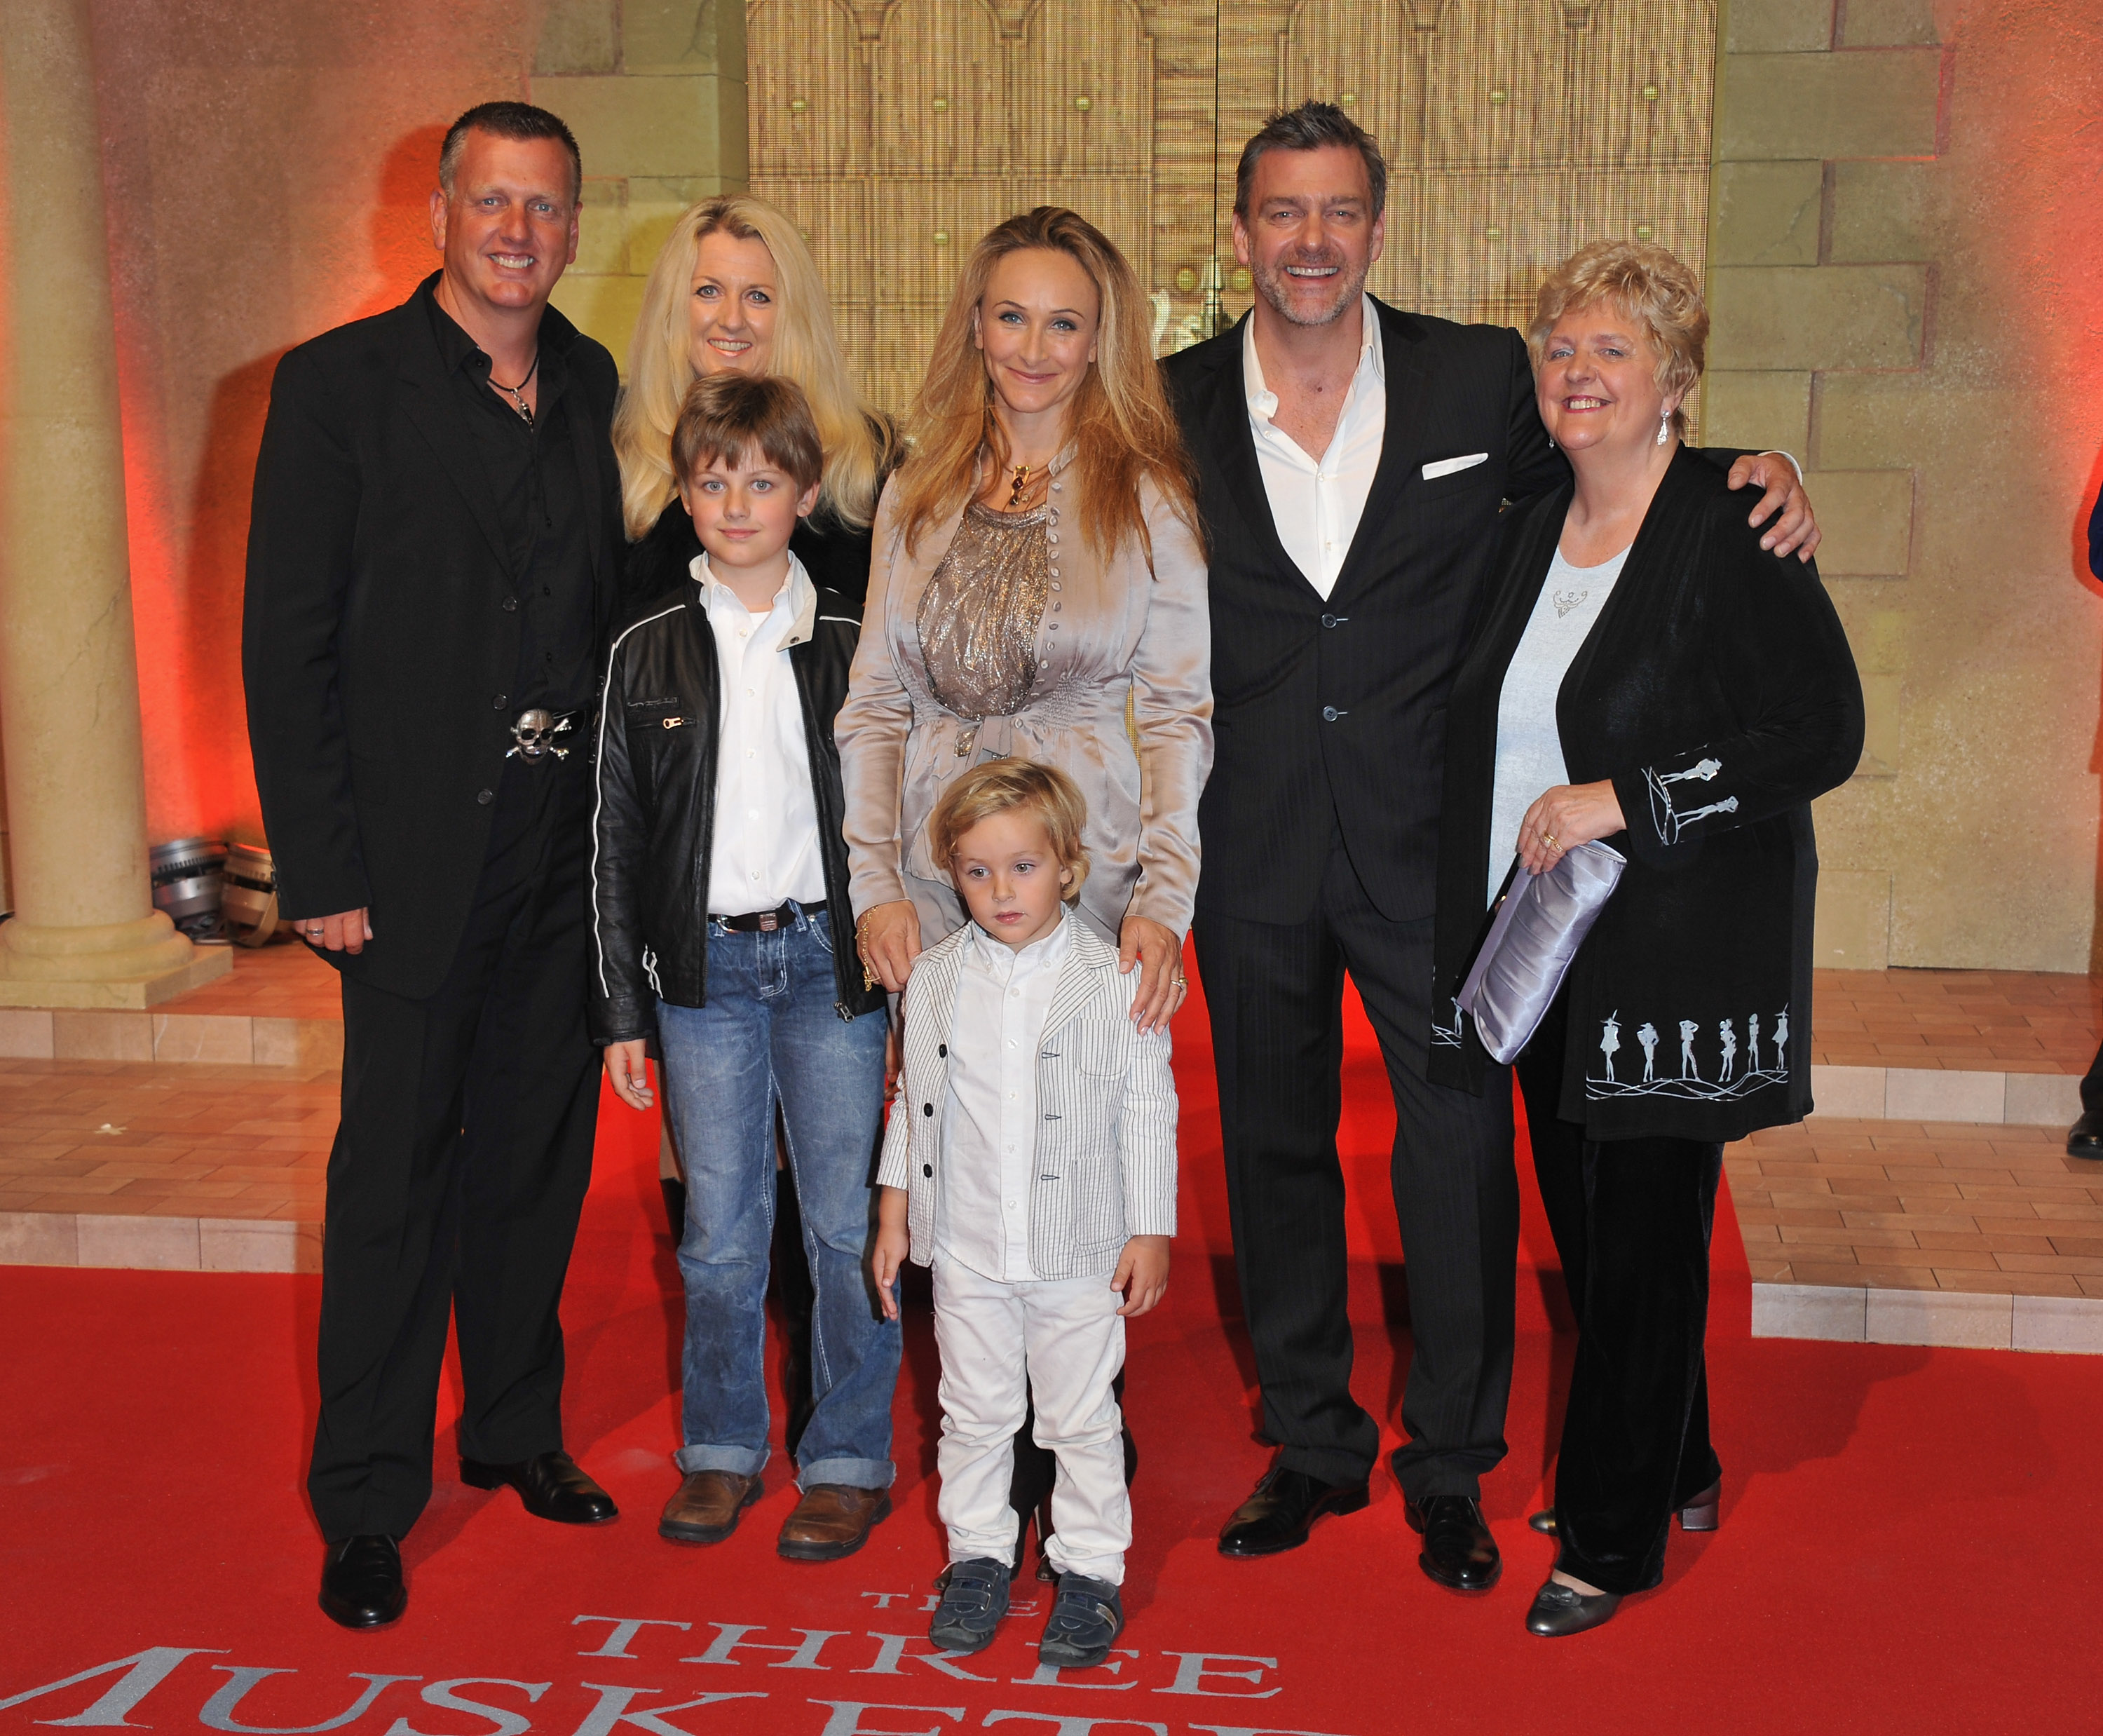 Ray Stevenson and Elisabetta Caraccia and family arrive at the "Three Musketeers in 3D" world premiere at Vue Westfield, on October 4, 2011, in London, England. | Source: Getty Images